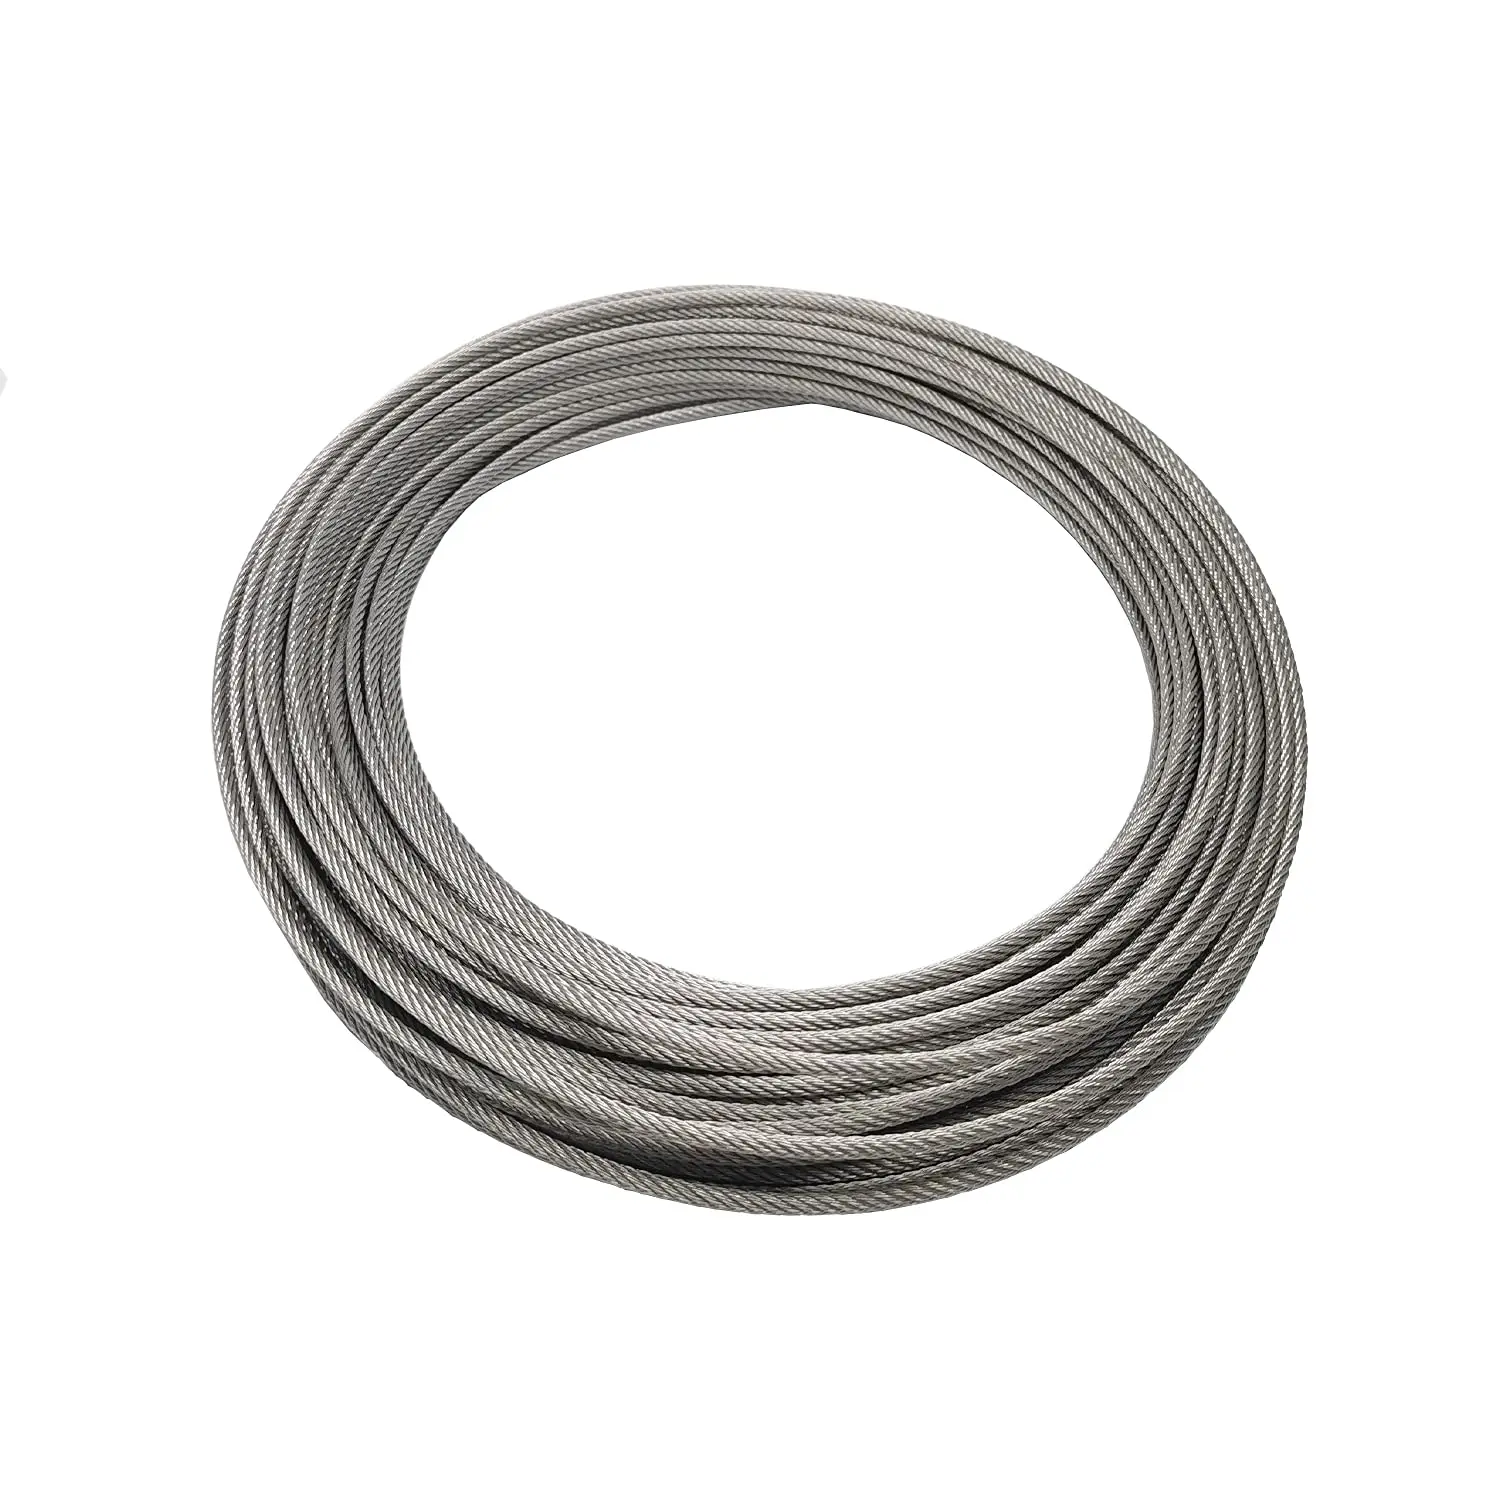 120 Feet 18 Inch T316 Stainless Steel Aircraft Wire Rope Cable for DIY Railing, Decking, 7x7 Strands Construction